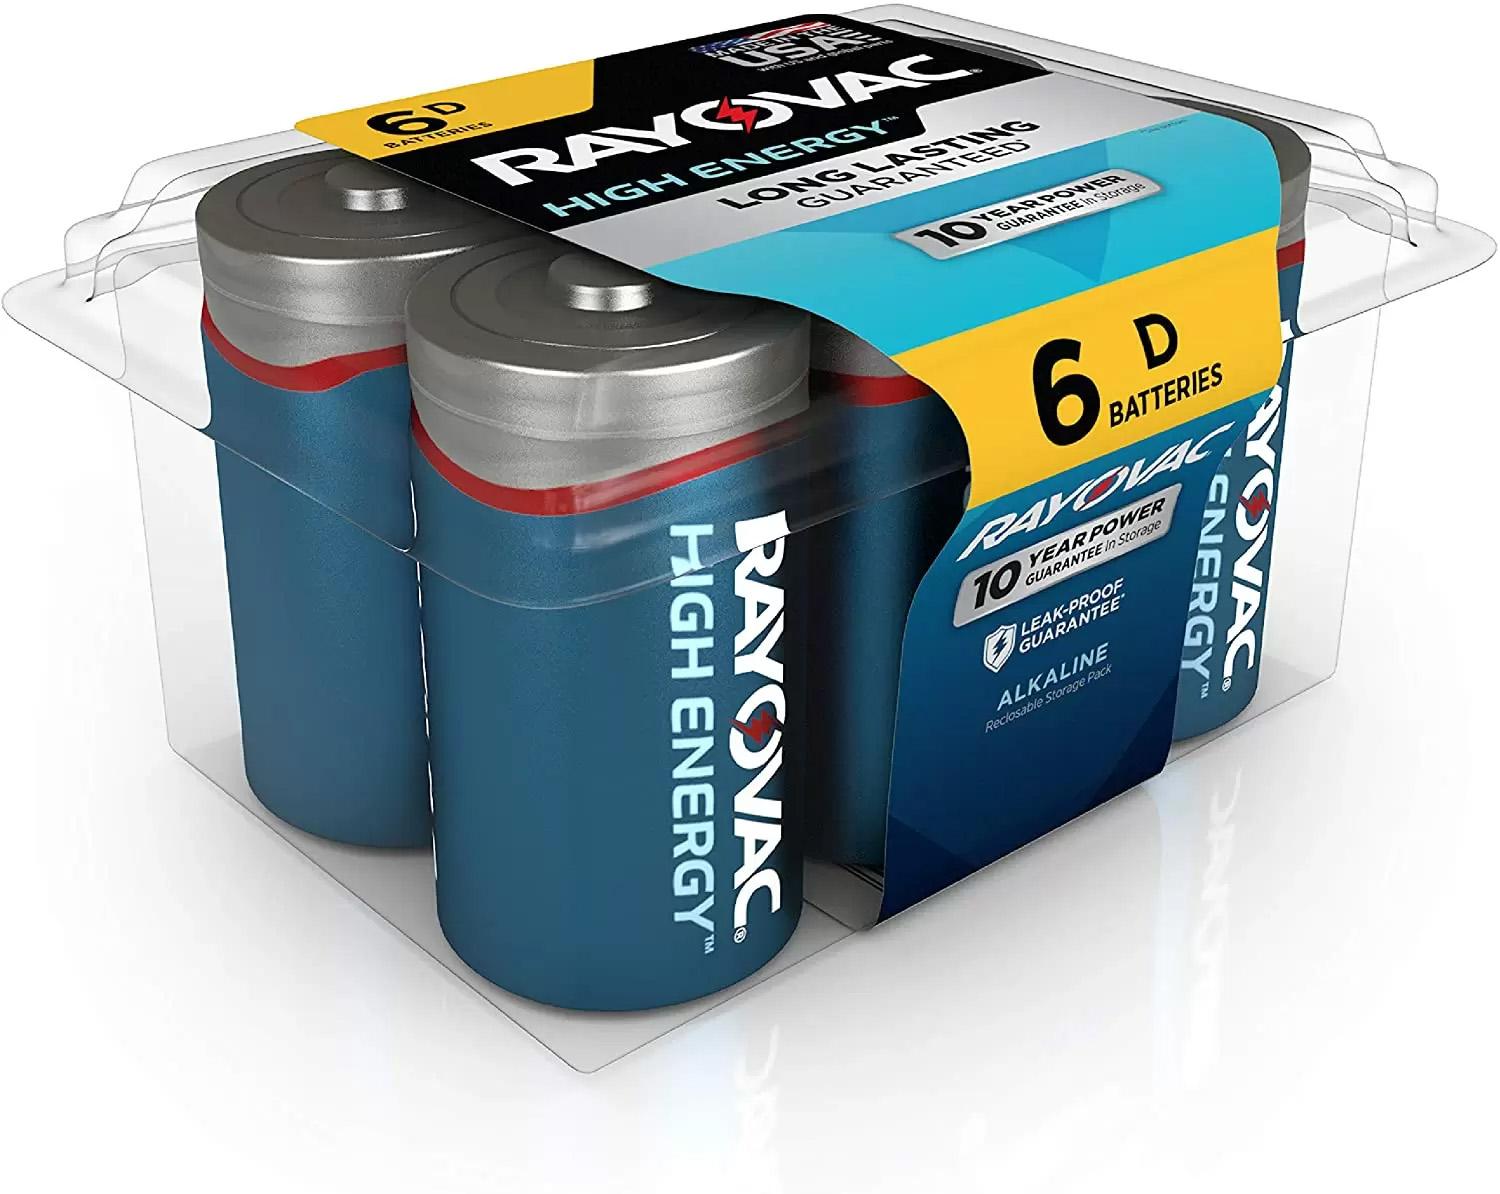 6 Rayovac Alkaline D Cell Batteries for $4